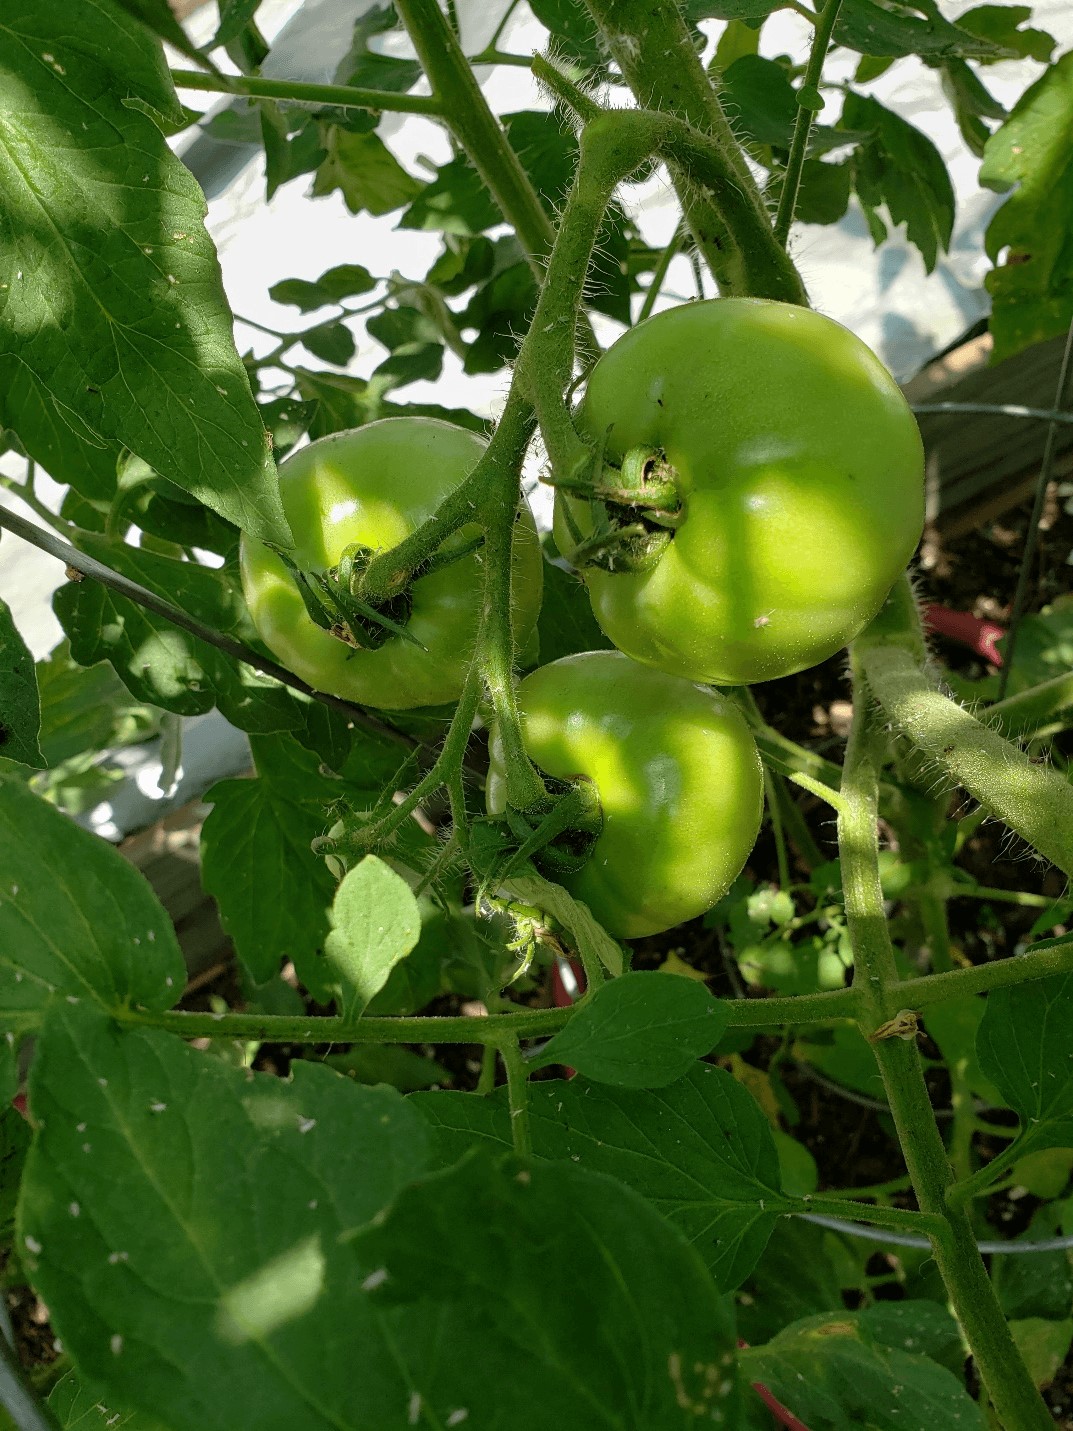 Three green 'Celebrity' tomatoes on a tomato plant